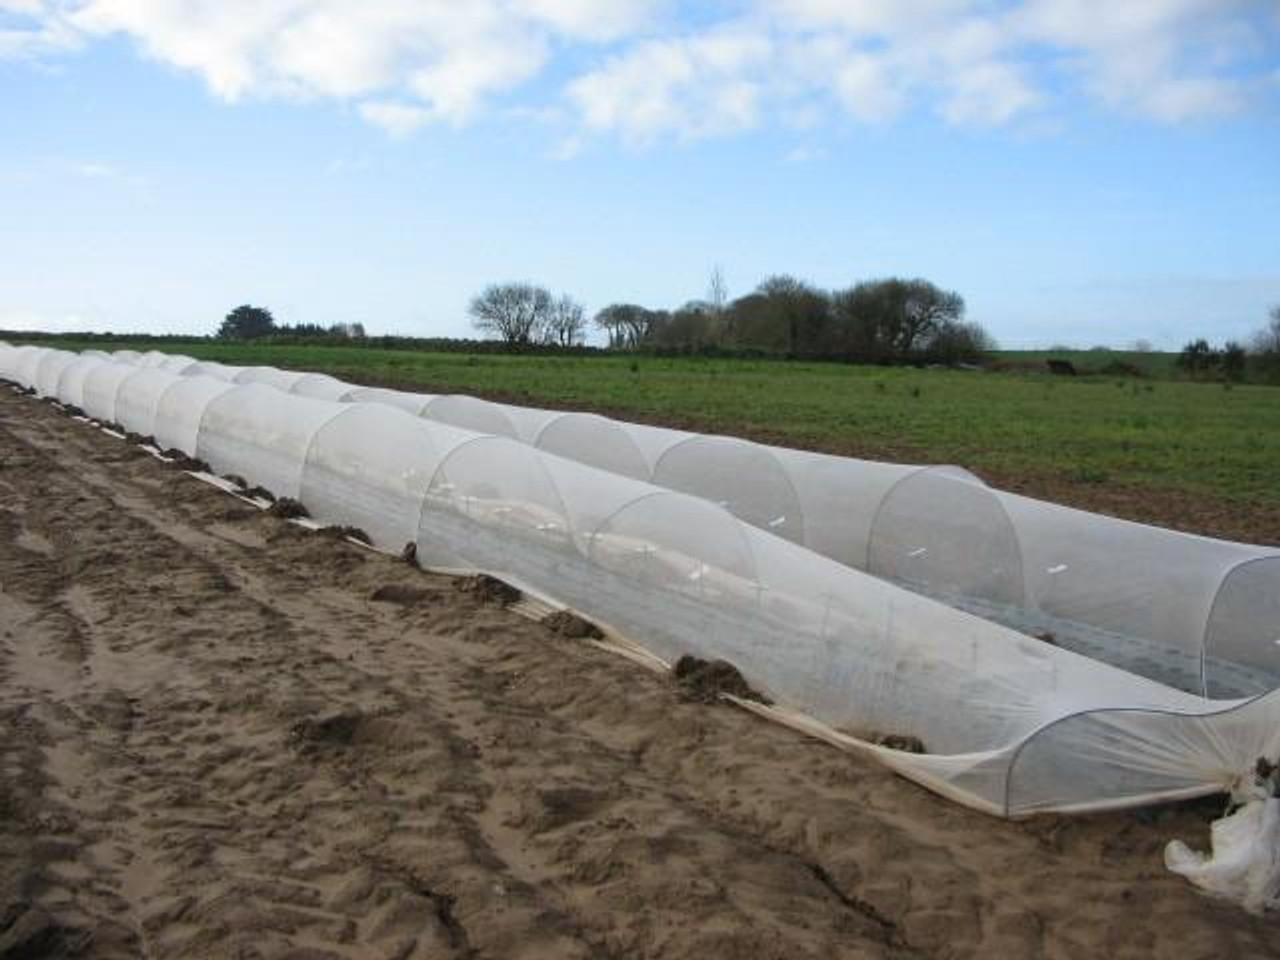 22 X 100' FINE MESH INSECT NETTING